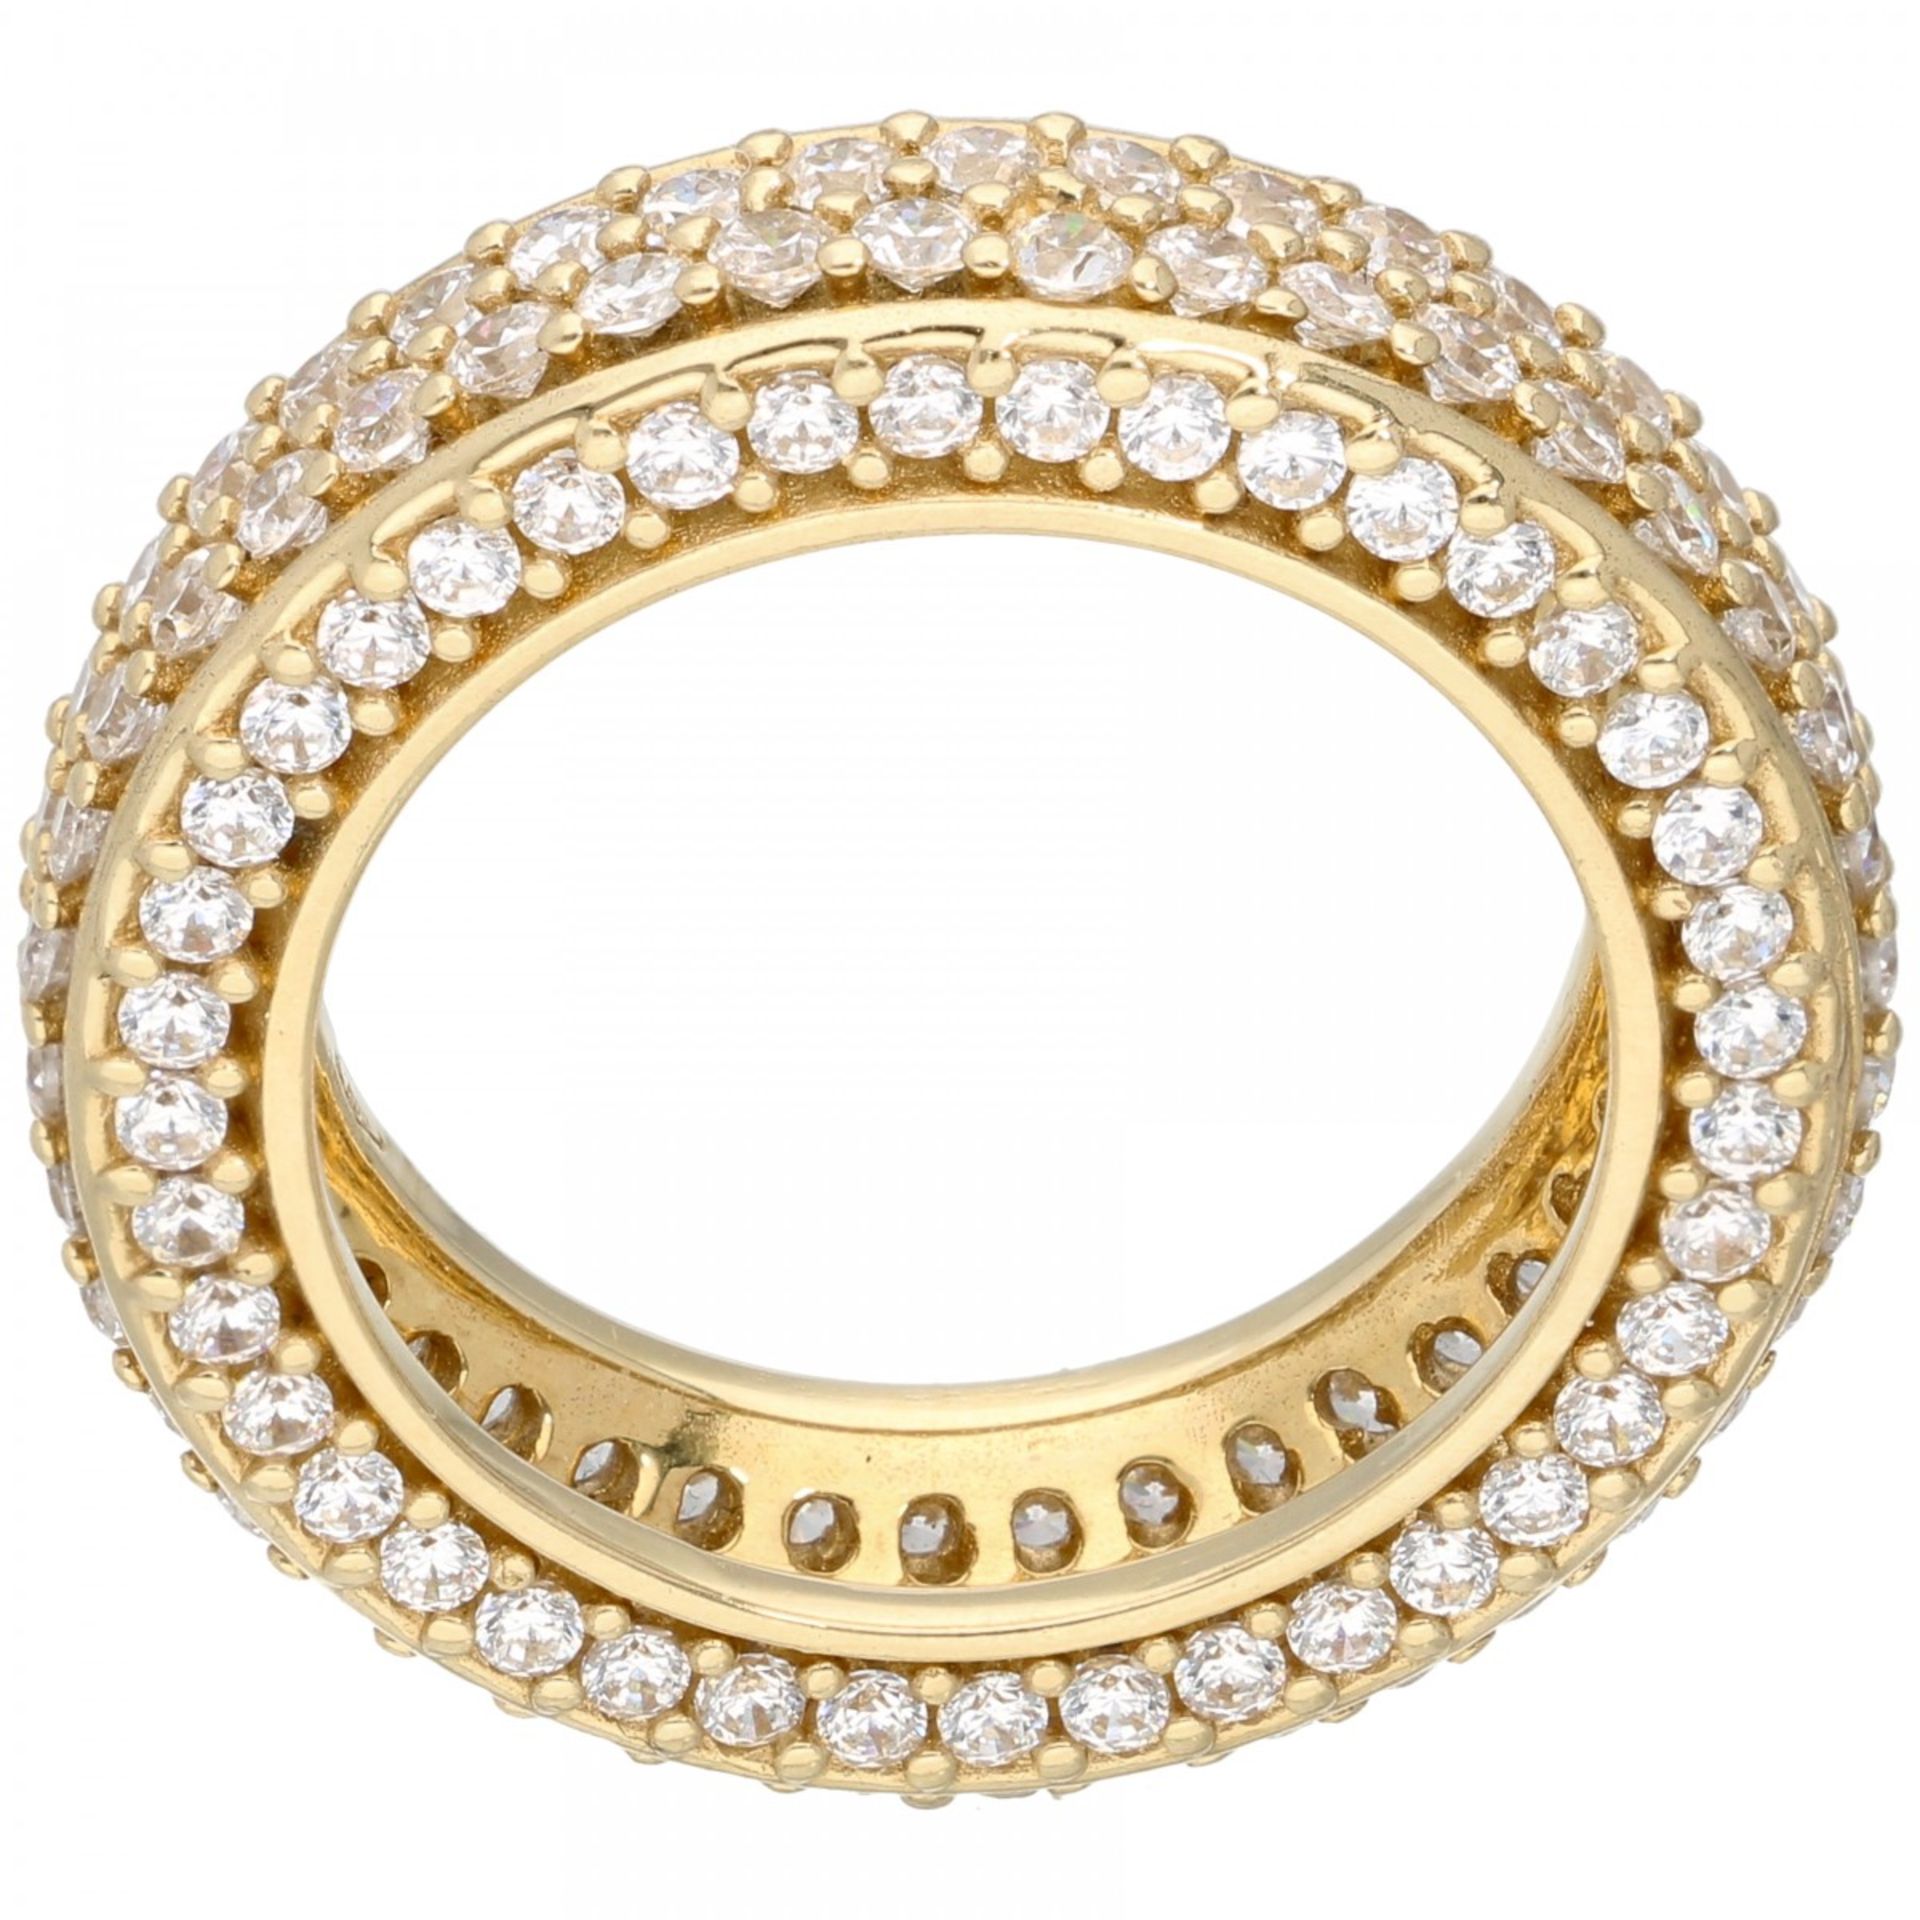 Yellow gold band ring set with zirconia in a pavé setting - 14 ct. - Image 2 of 2